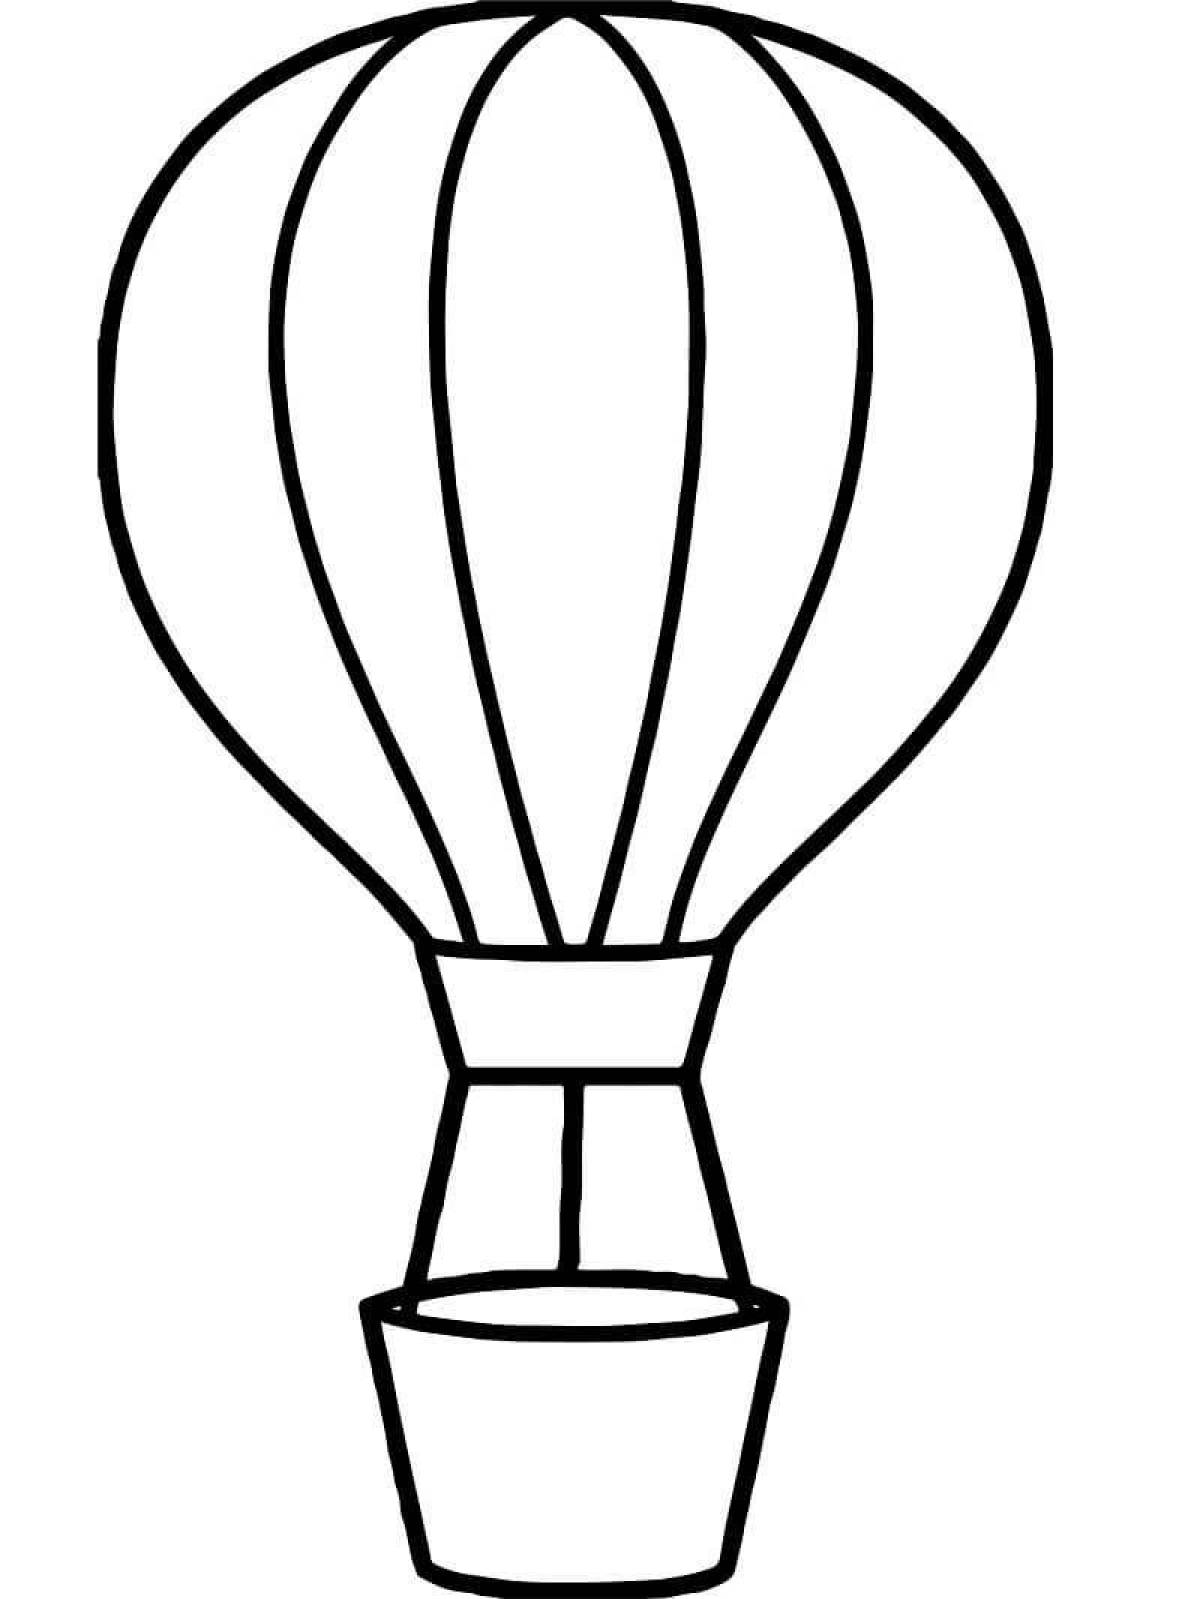 Joyful balloon coloring page for kids